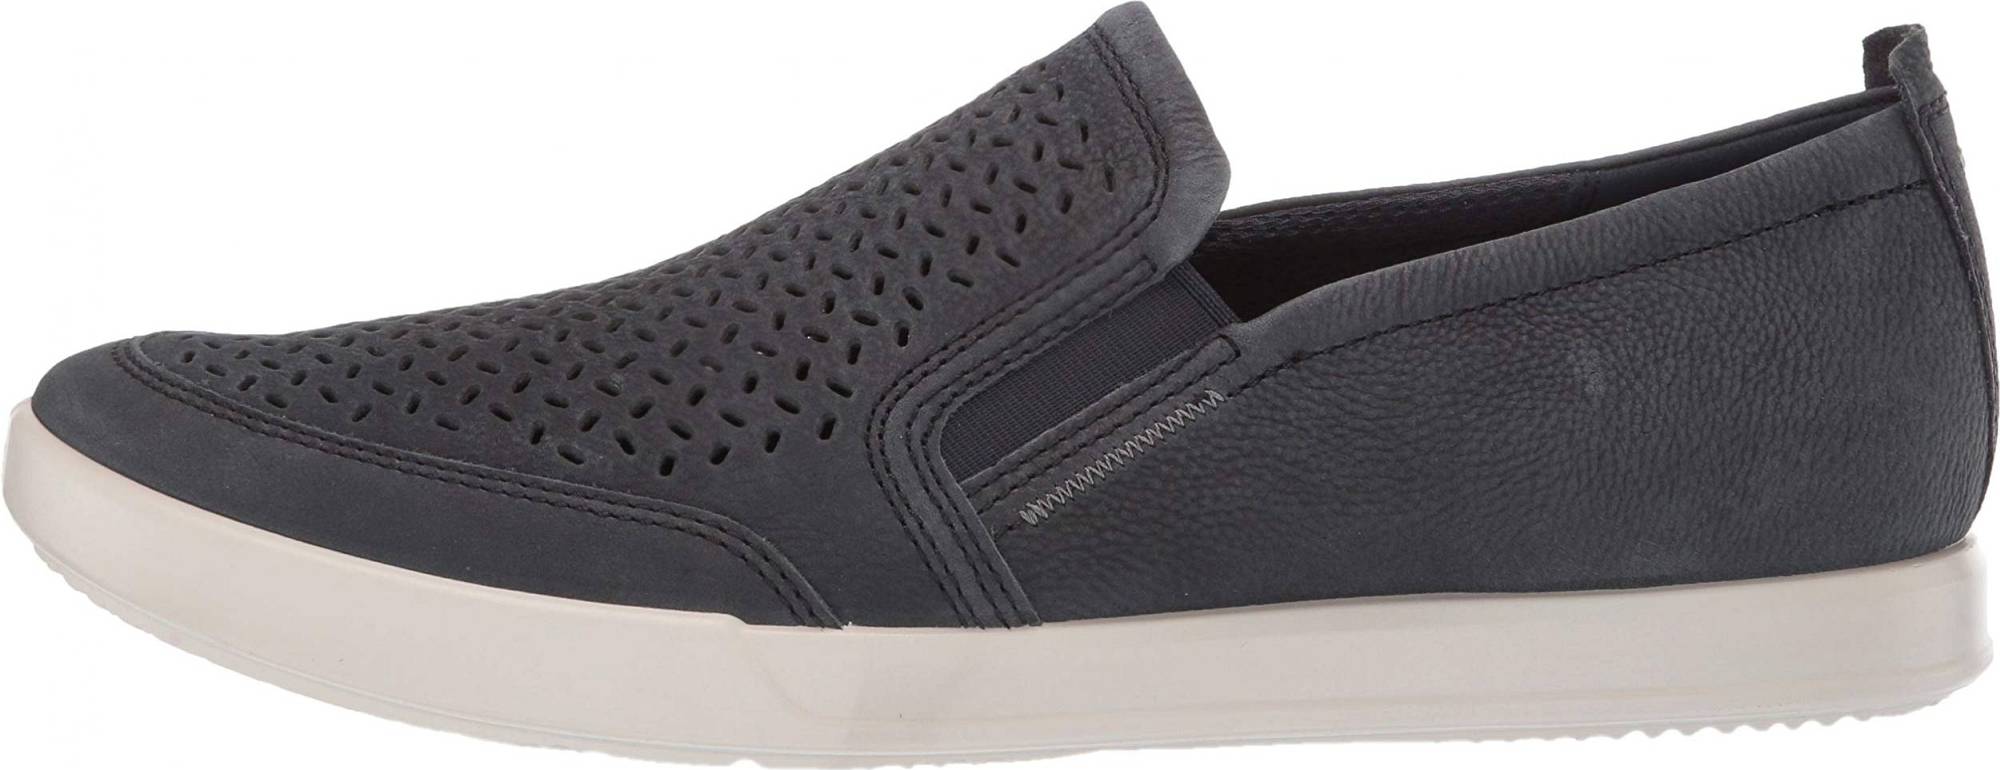 Ecco Collin 2.0 Slip On – Shoes Reviews & Reasons To Buy